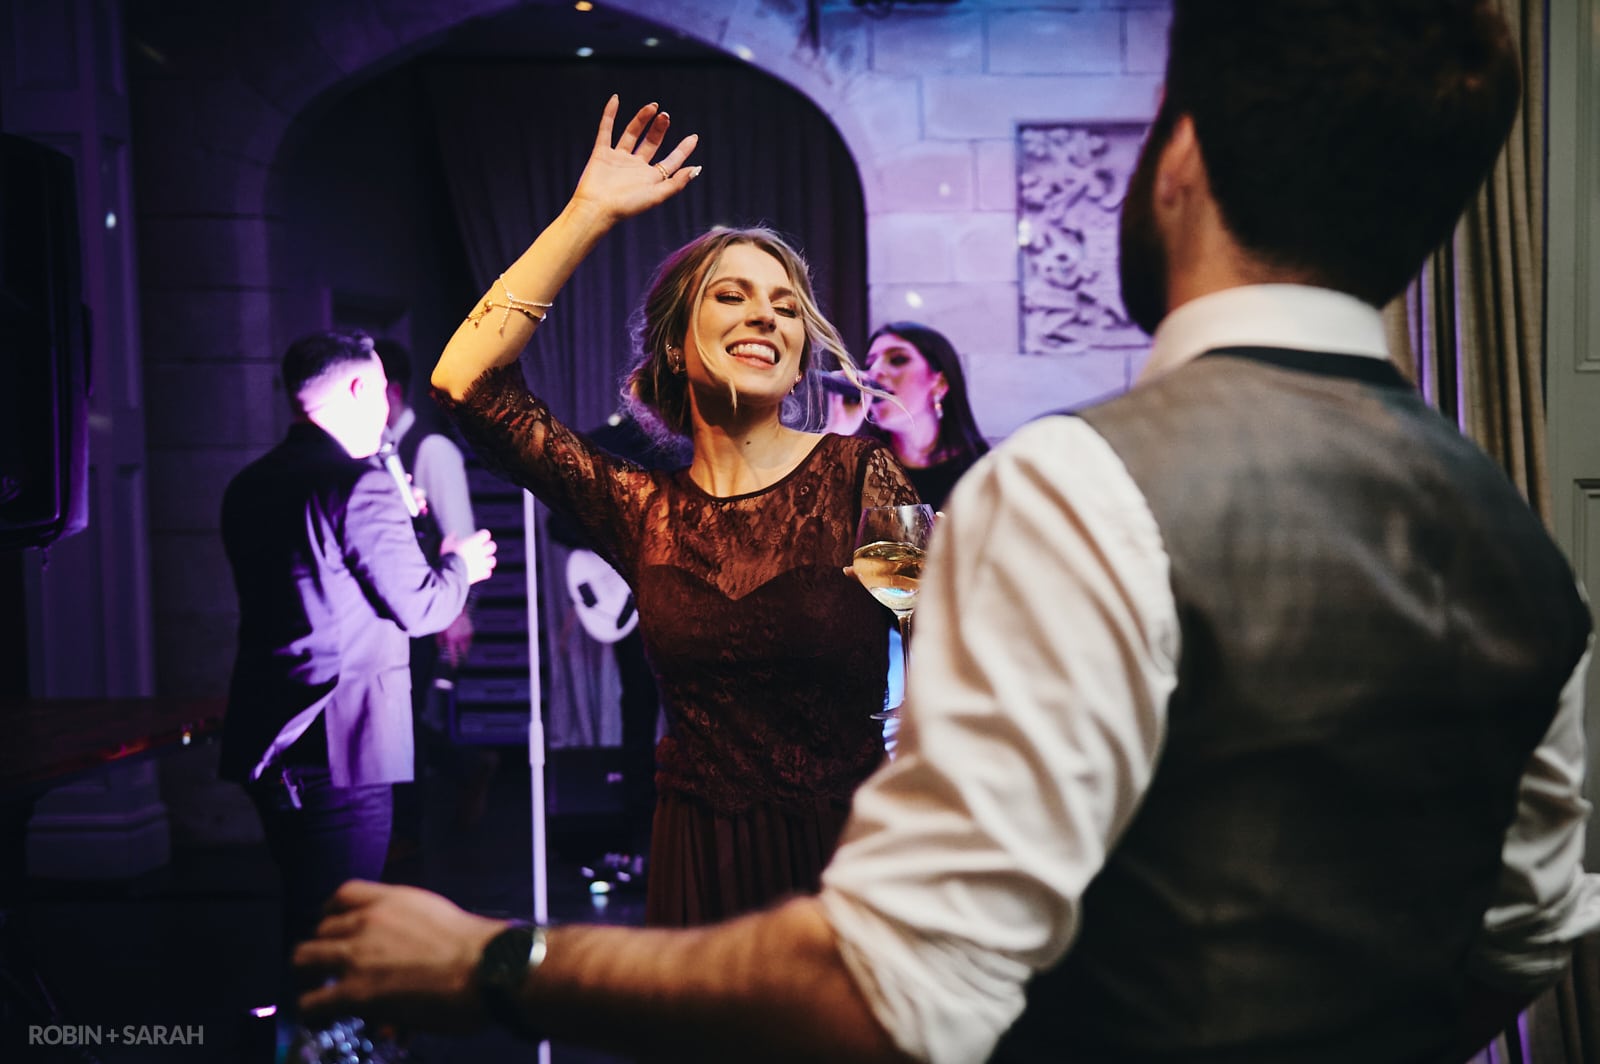 Wedding guests dancing as live band plays